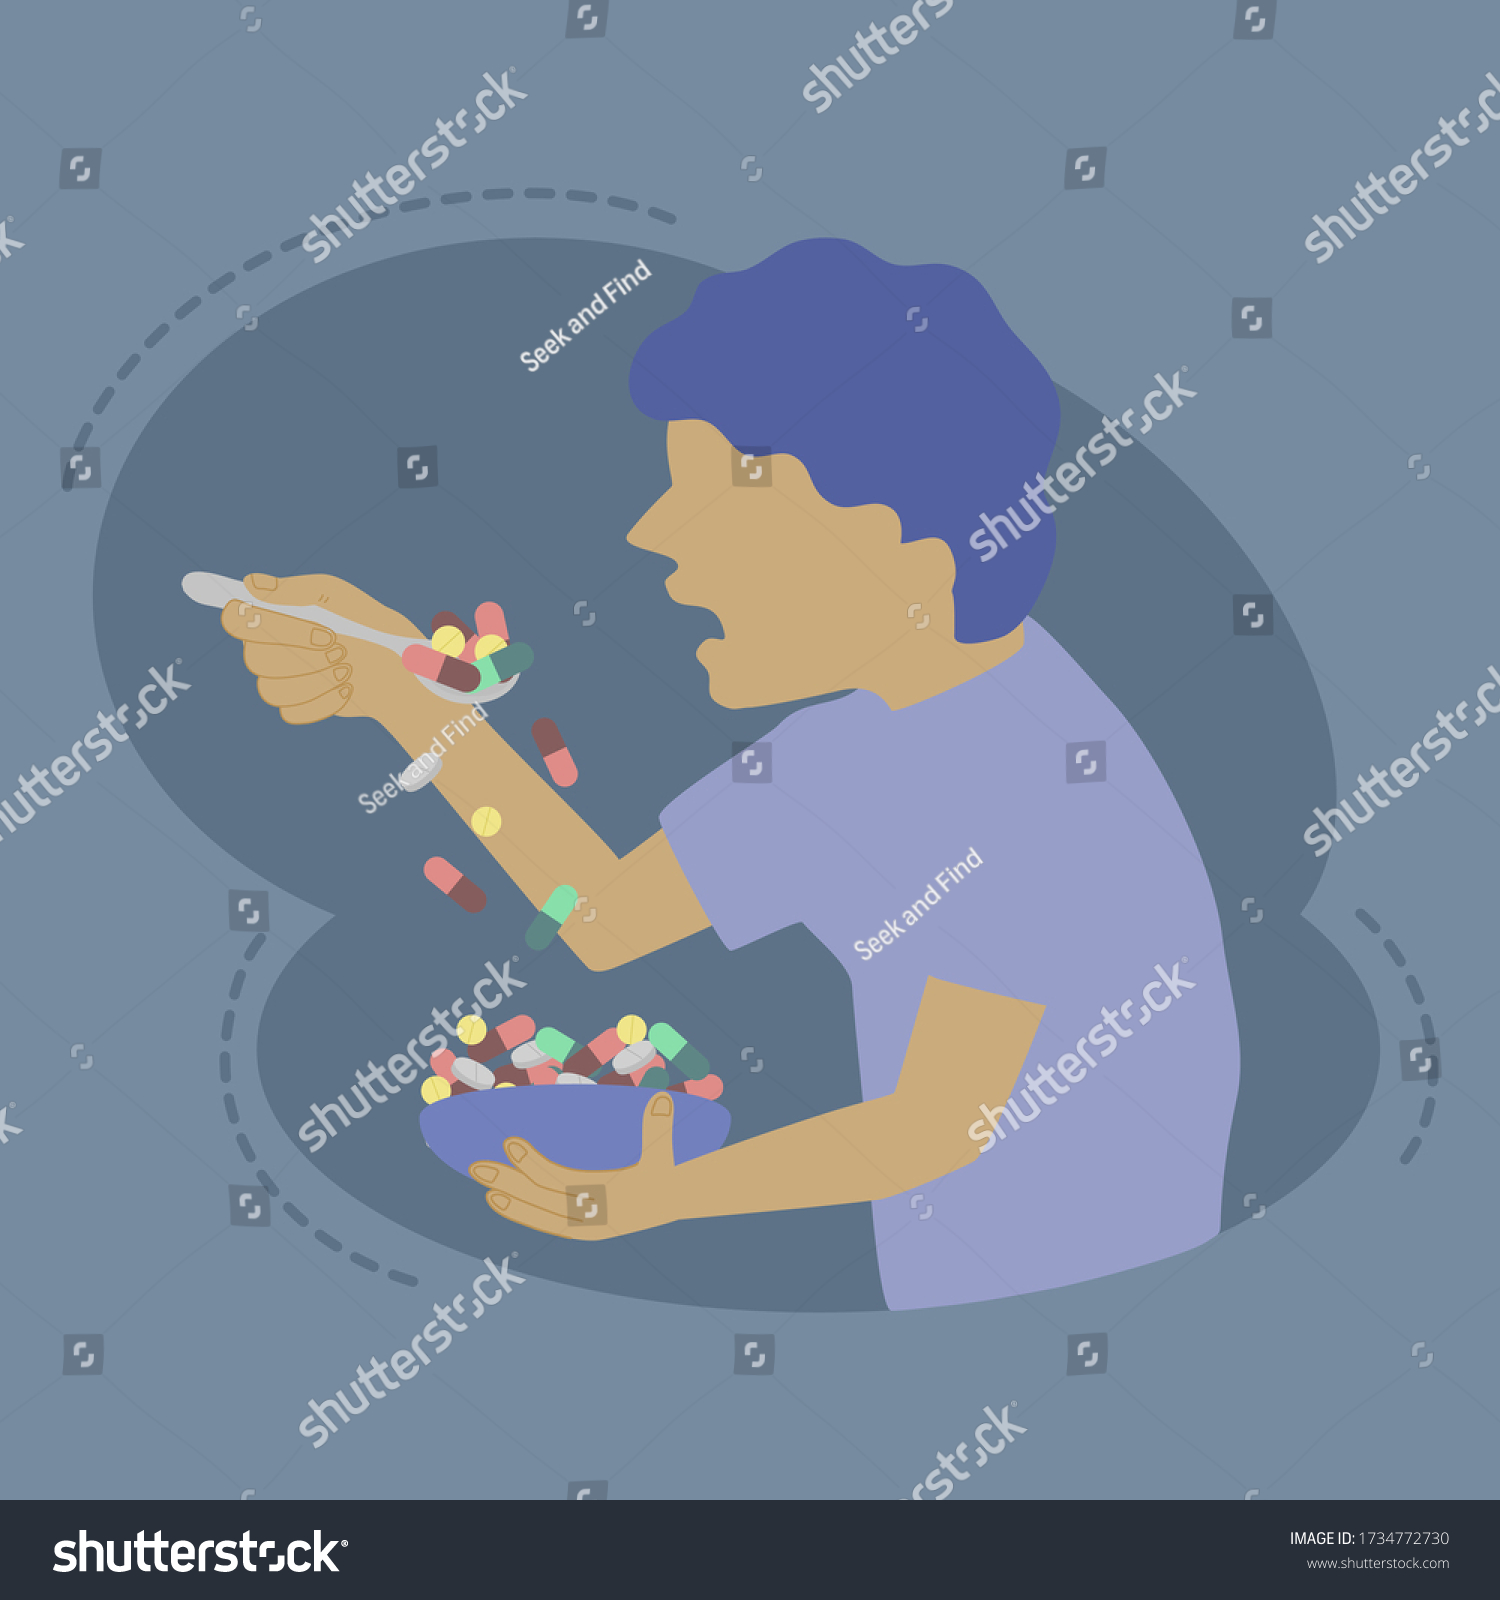 SVG of flat design illustration man eating a lot of medical pills. Concept for awareness of over usage of drugs and irrational use of medicines such as inappropriate self-medication. svg